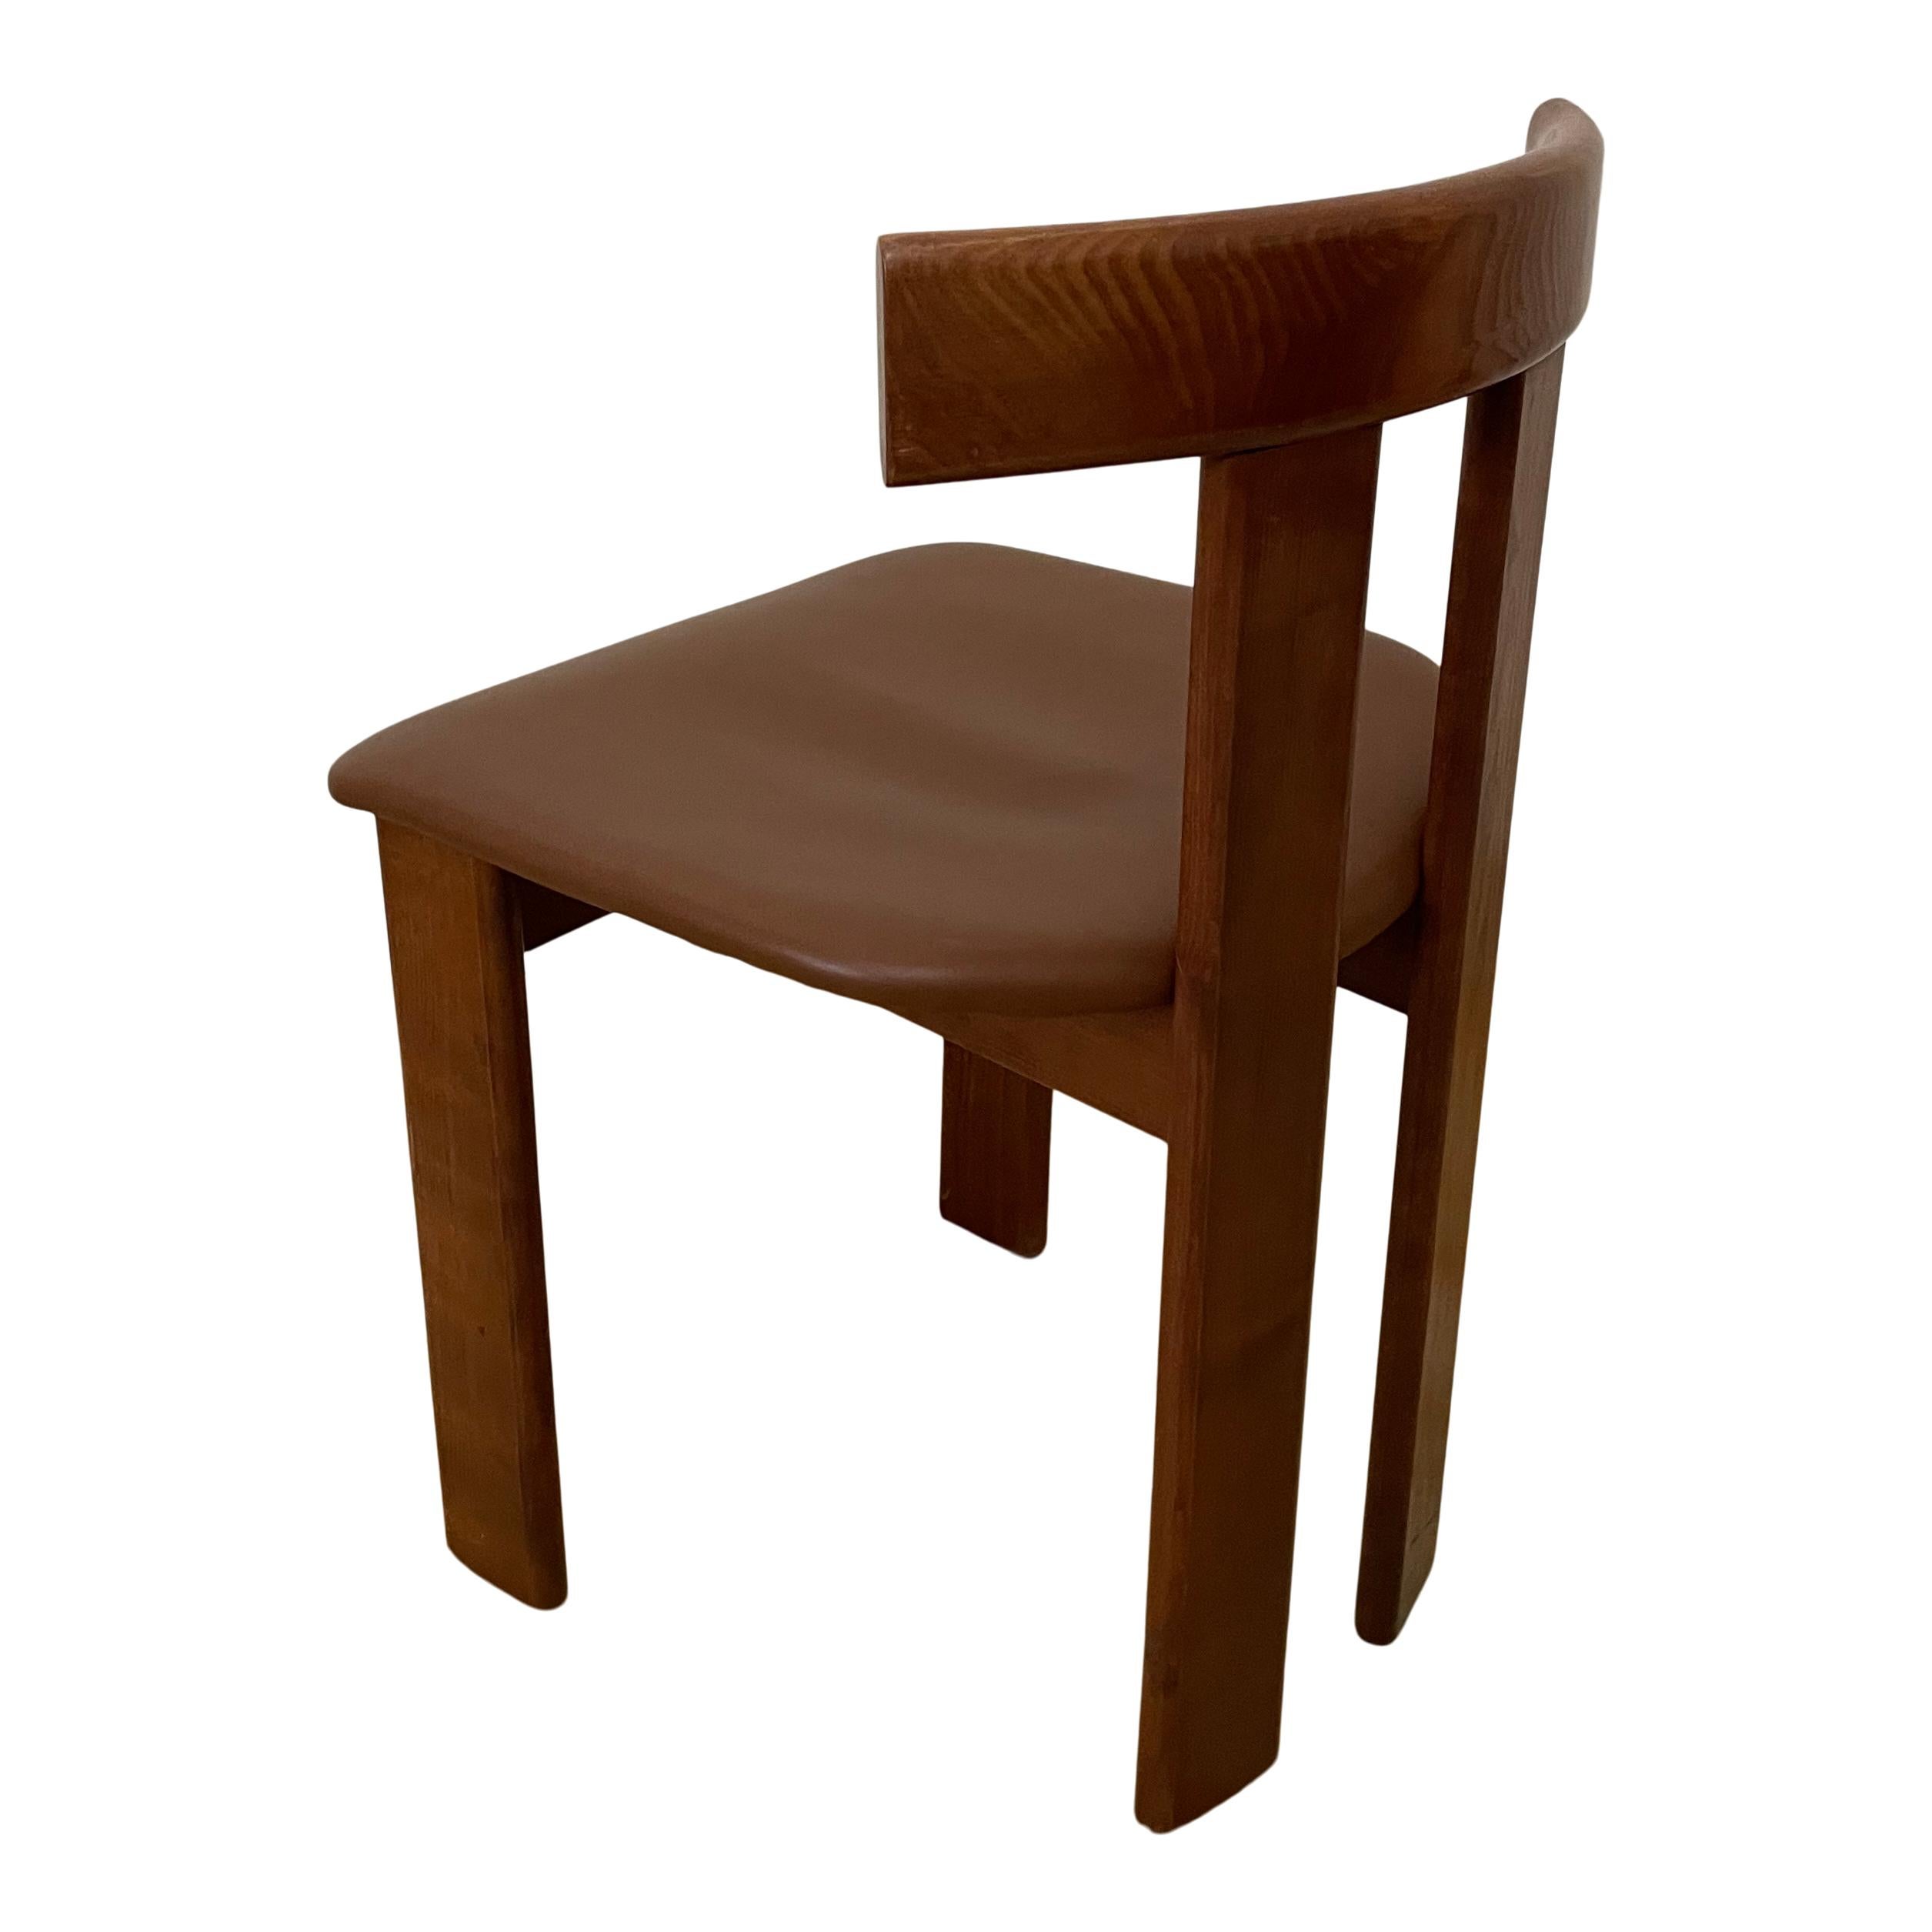 Set of 6 Midcentury Italian Walnut and Leather Dining Chairs, 1970s For Sale 2